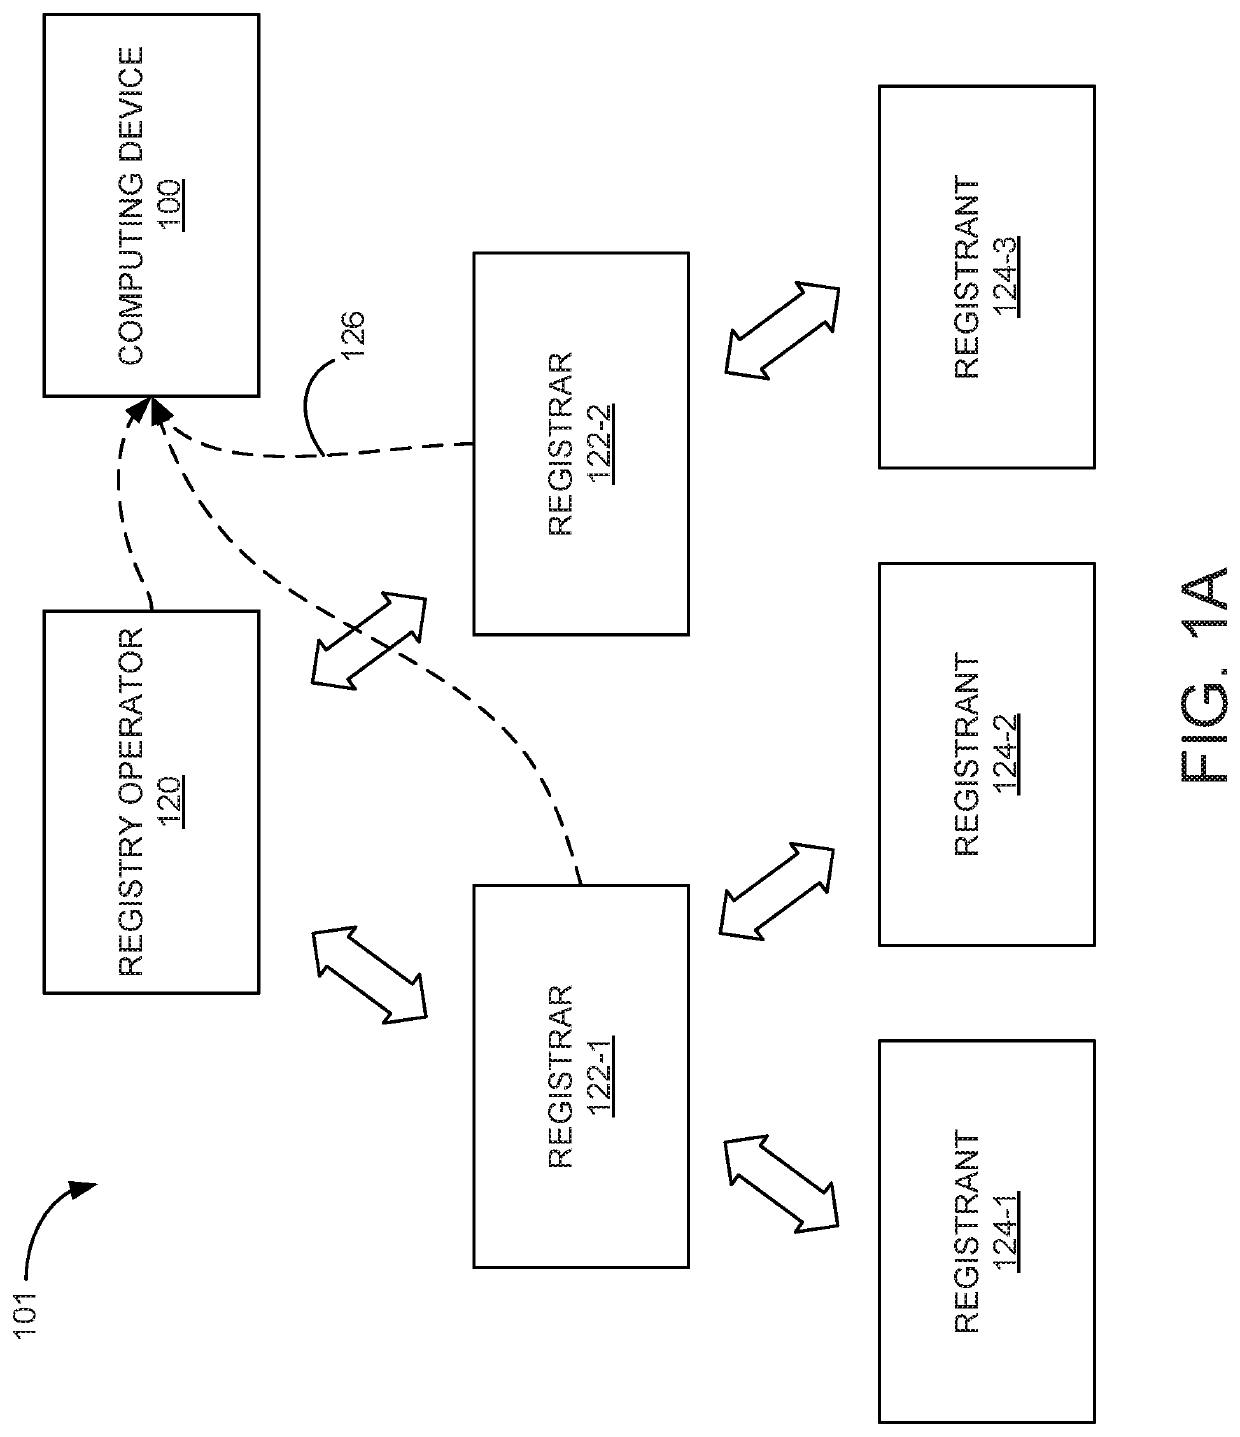 Early detection of risky domains via registration profiling